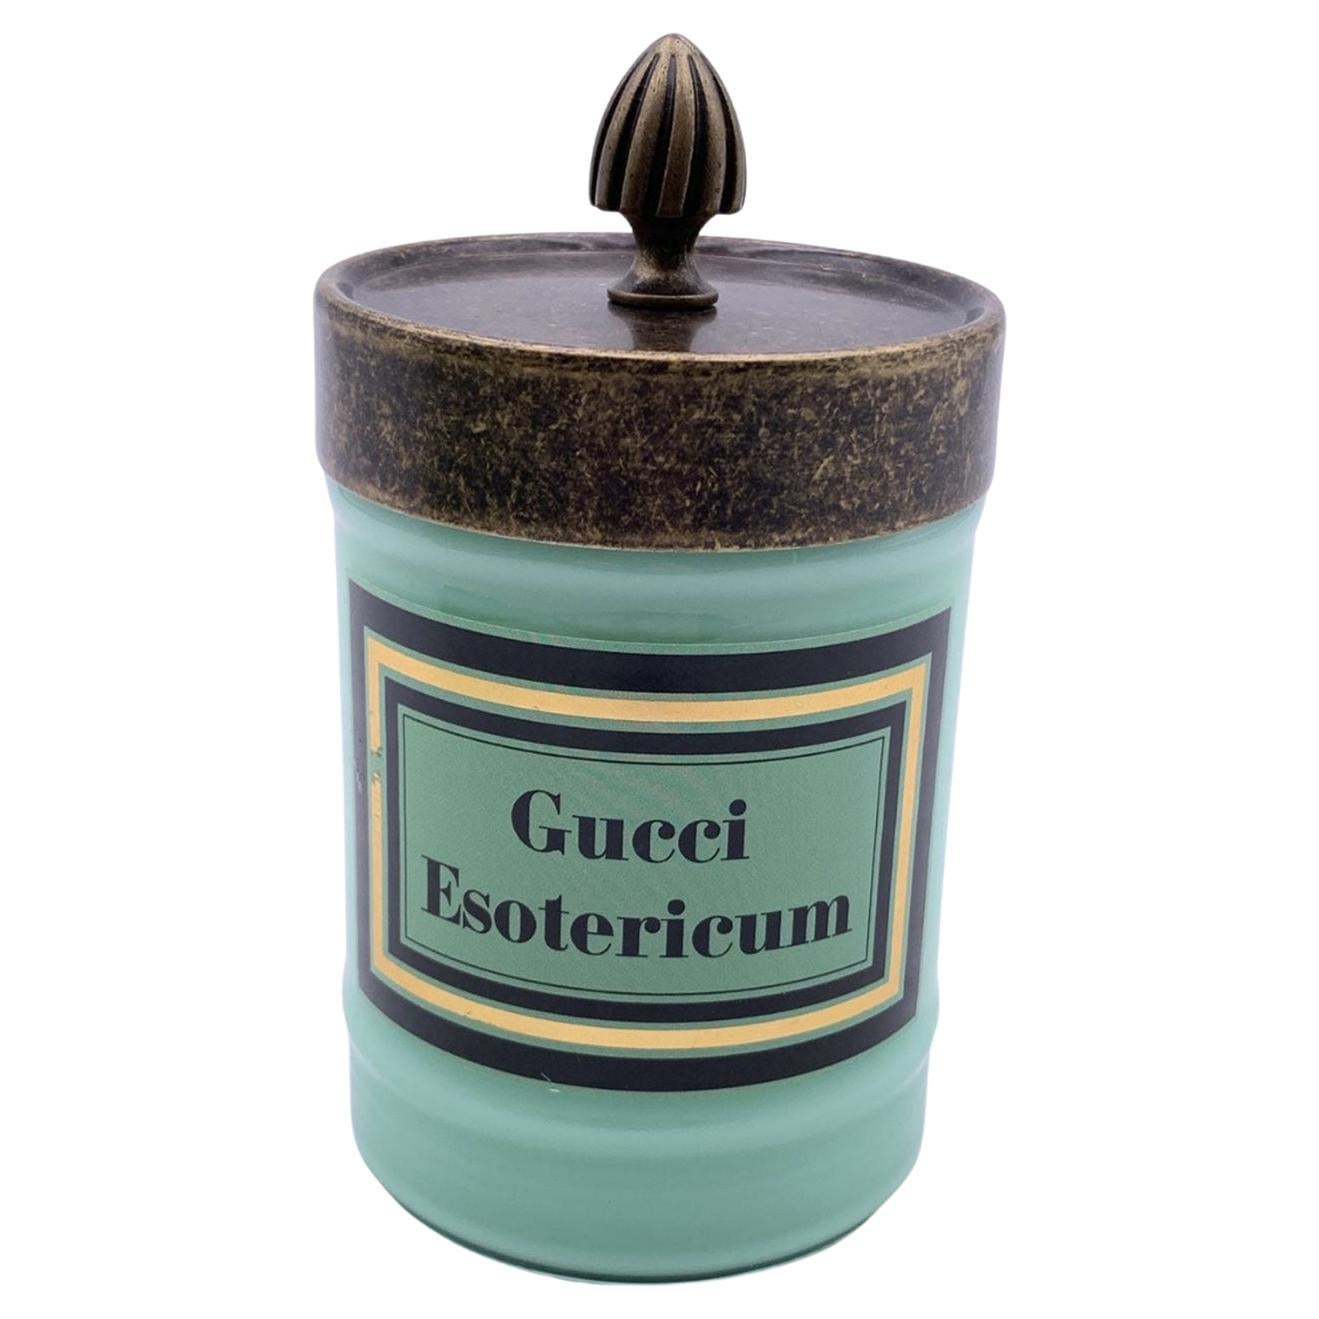 Gucci Esotericum Scented Candle Aqua Green Murano Glass Jar For Sale